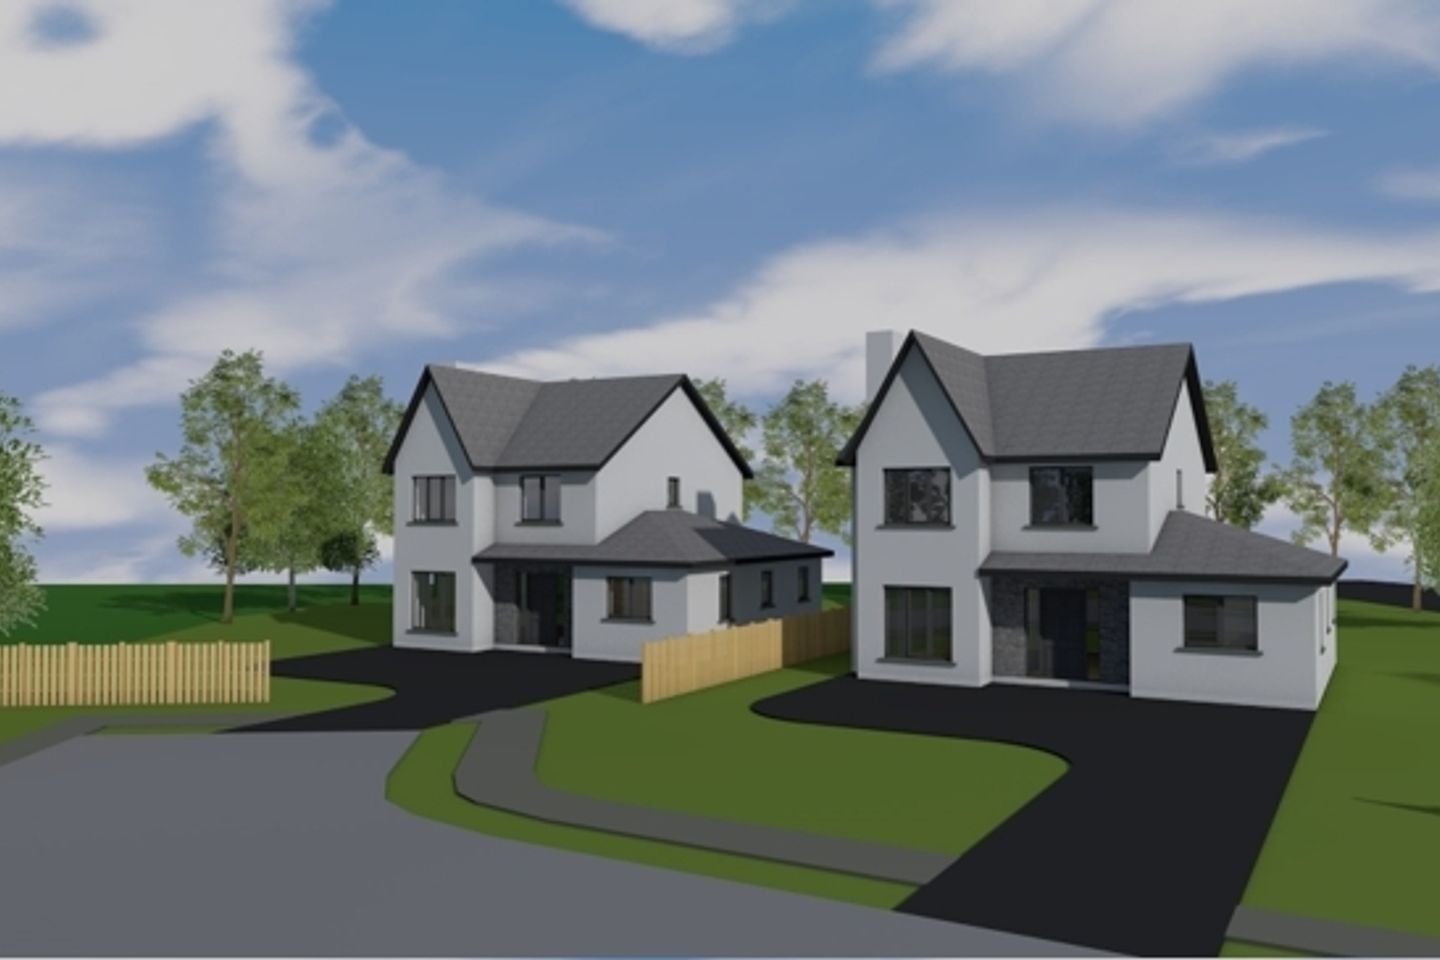 4 Bed A Rated Detached Home, 4 Bed A Rated Detached Home, Old Forest, Final Stage Of Development, Bunclody, Co. Wexford, Y21CX9R